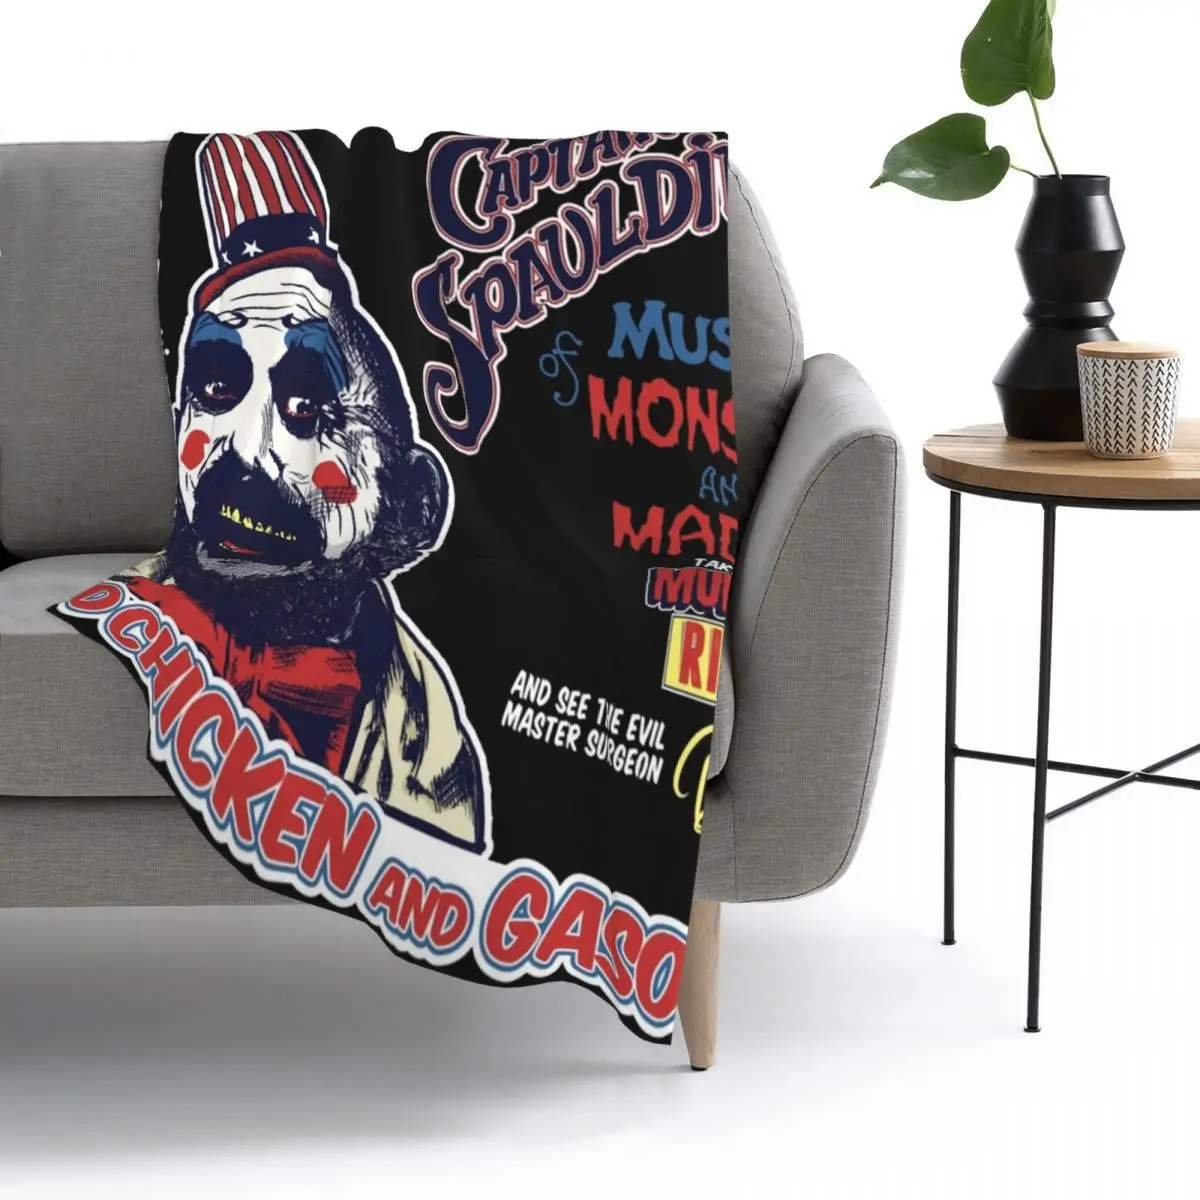 

Captain Spaulding Museum Of Monsters And Madmen Throw Blanket BedBlanket Softblanket Flannel Warm bedding On Home travel couches